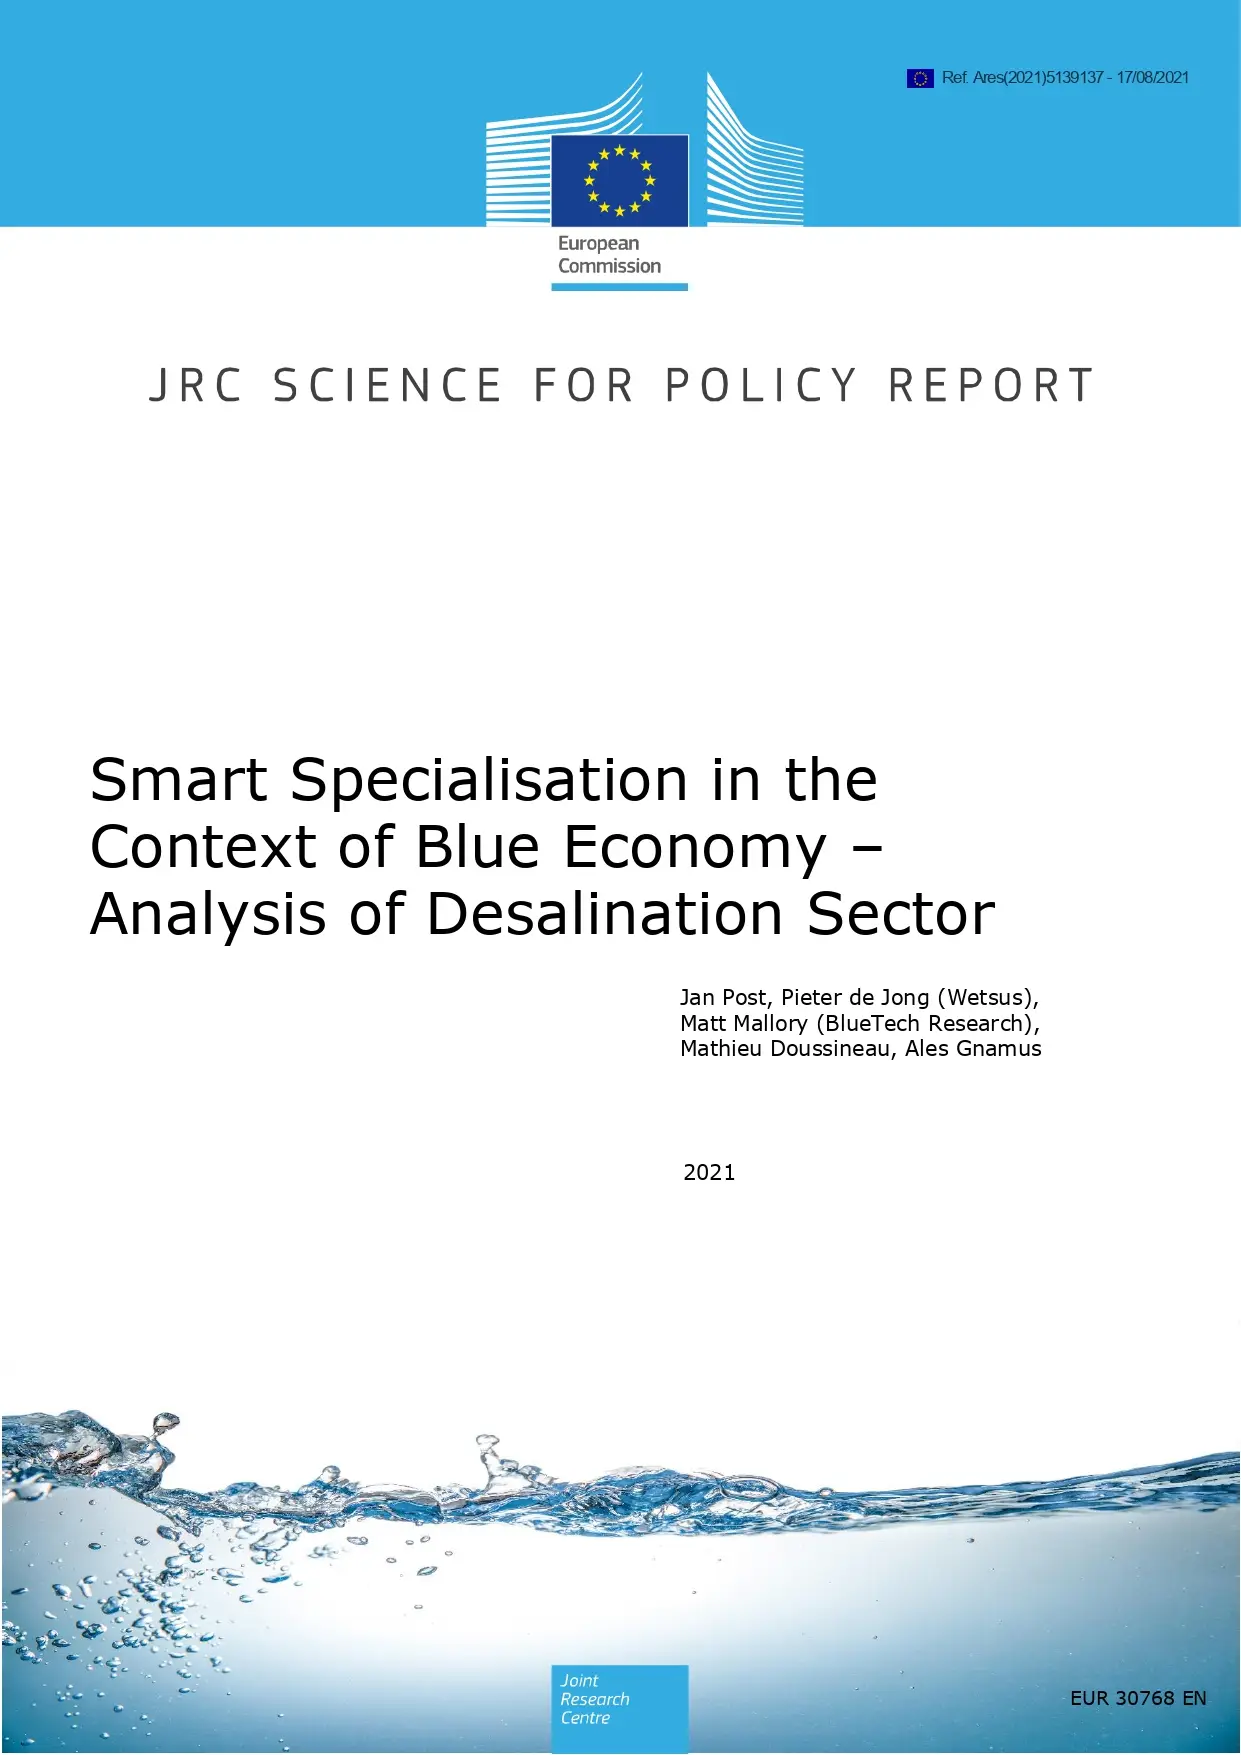 Smart Specialisation in the Context of Blue Economy – Analysis of Desalination Sector